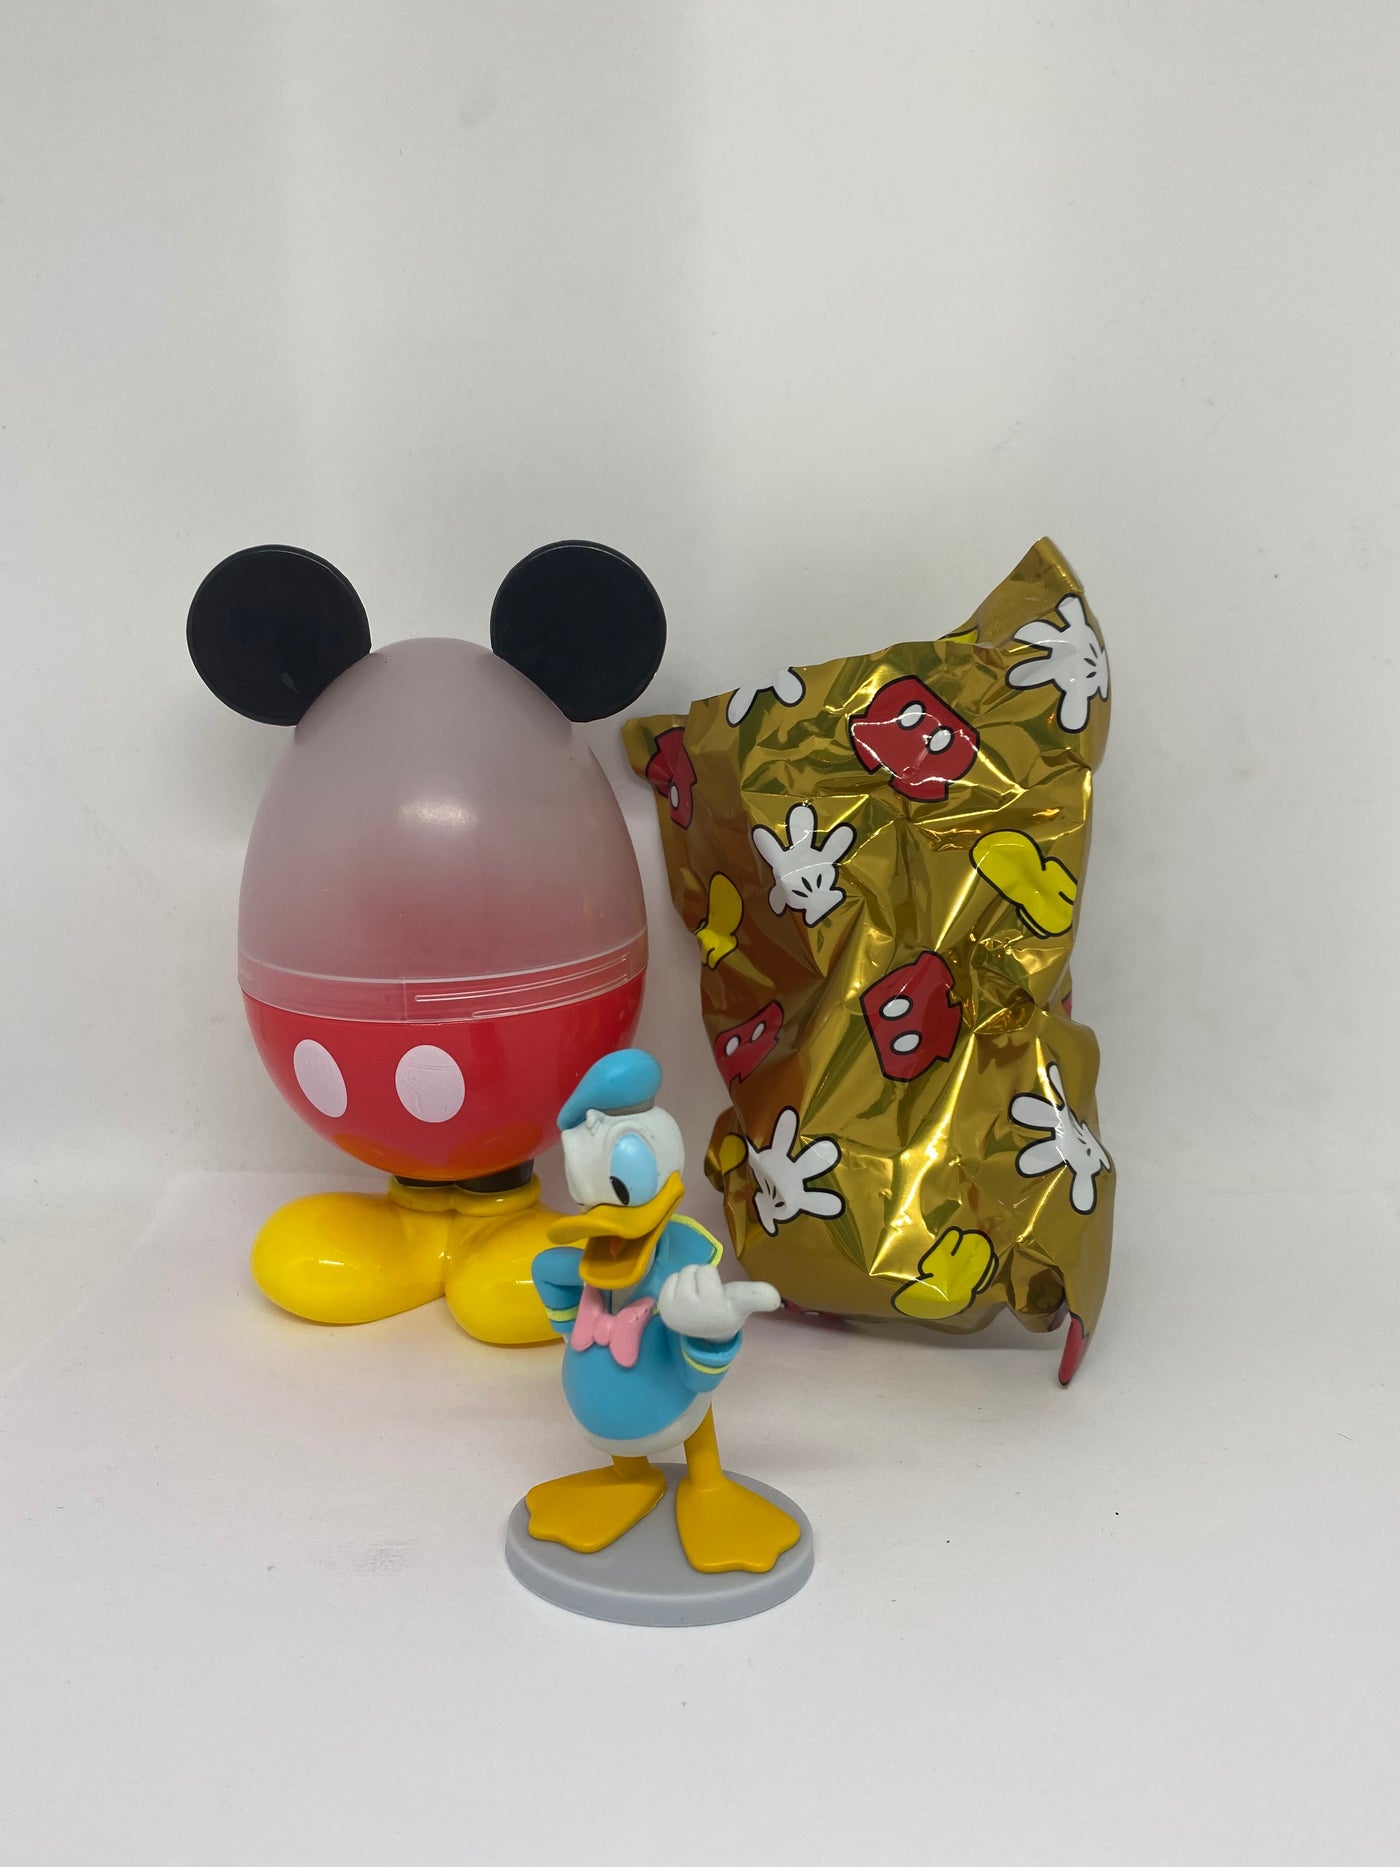 Disney Store 2020 Donald Mystery Egg Hunt Figurine New with Case